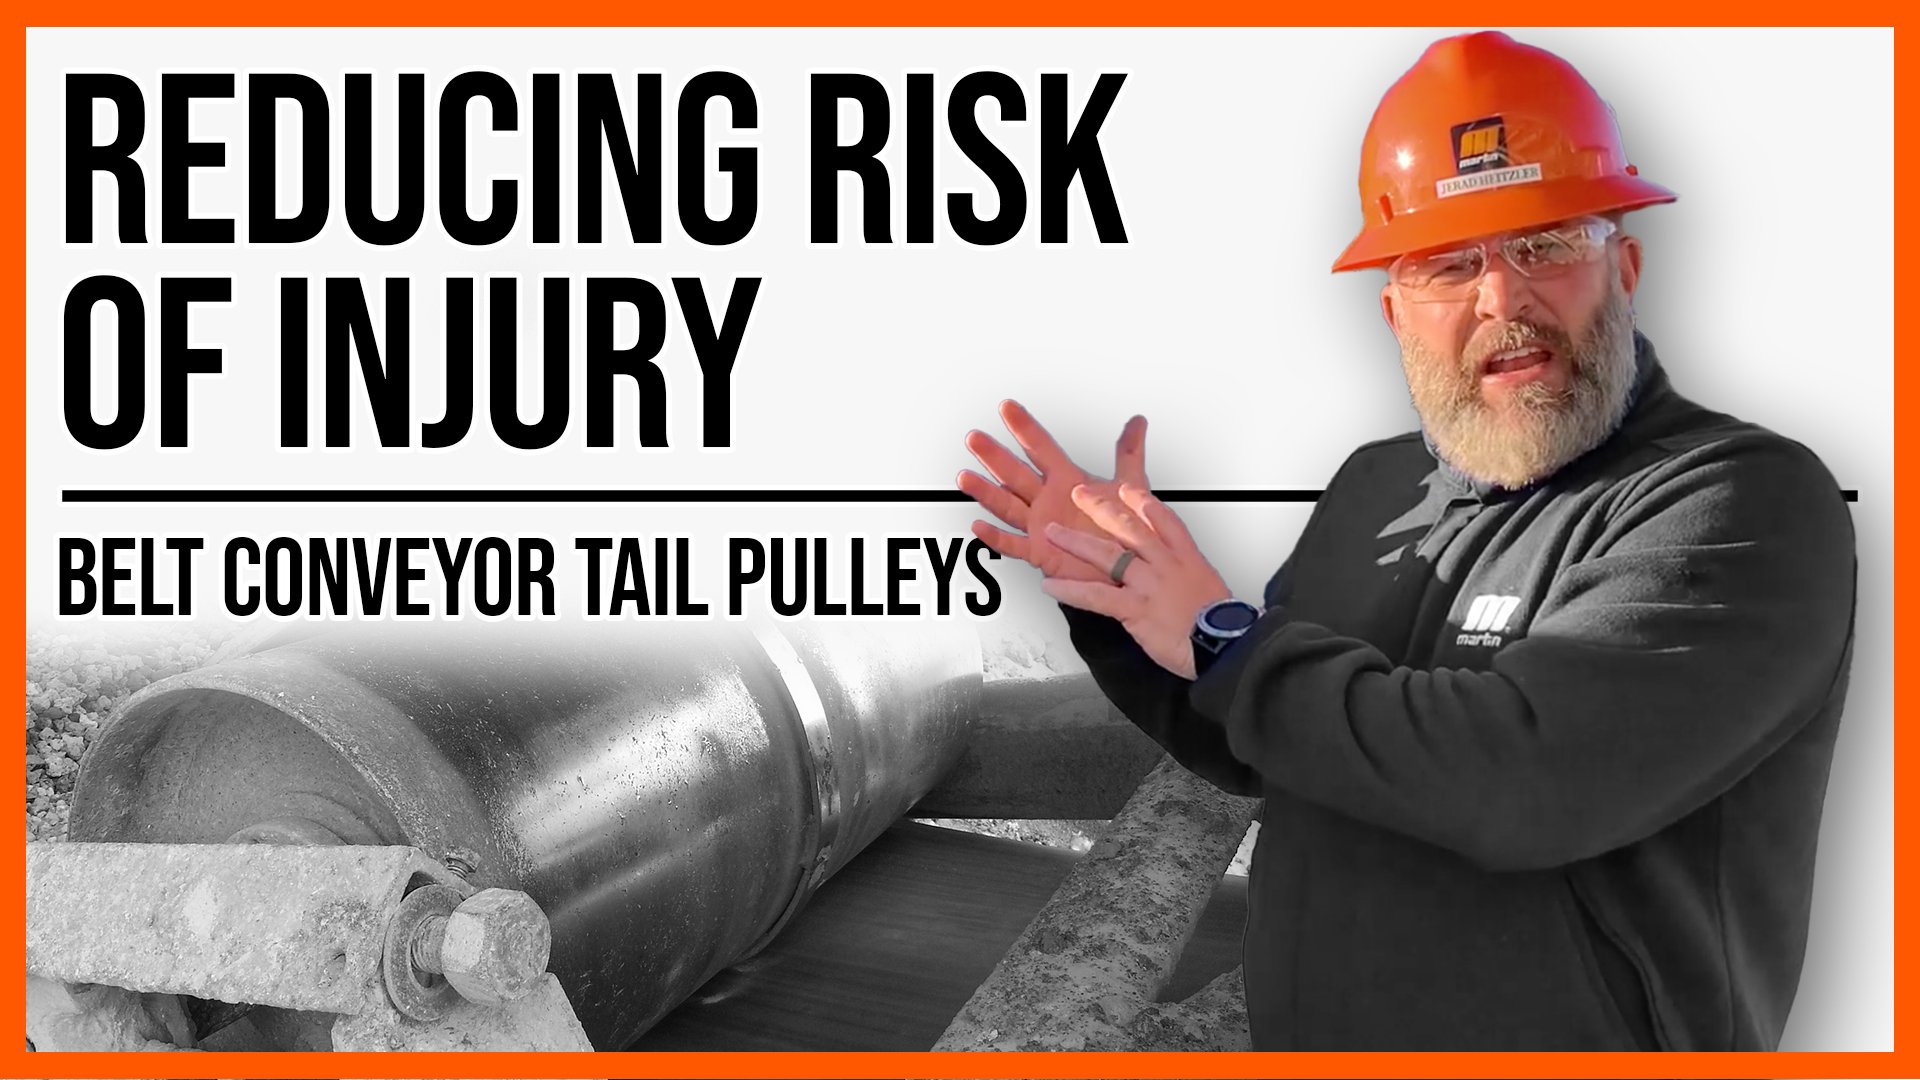 Reducing Risk of Injury, Tail Pulleys, Hard Hat, Safety Glasses, Conveyor